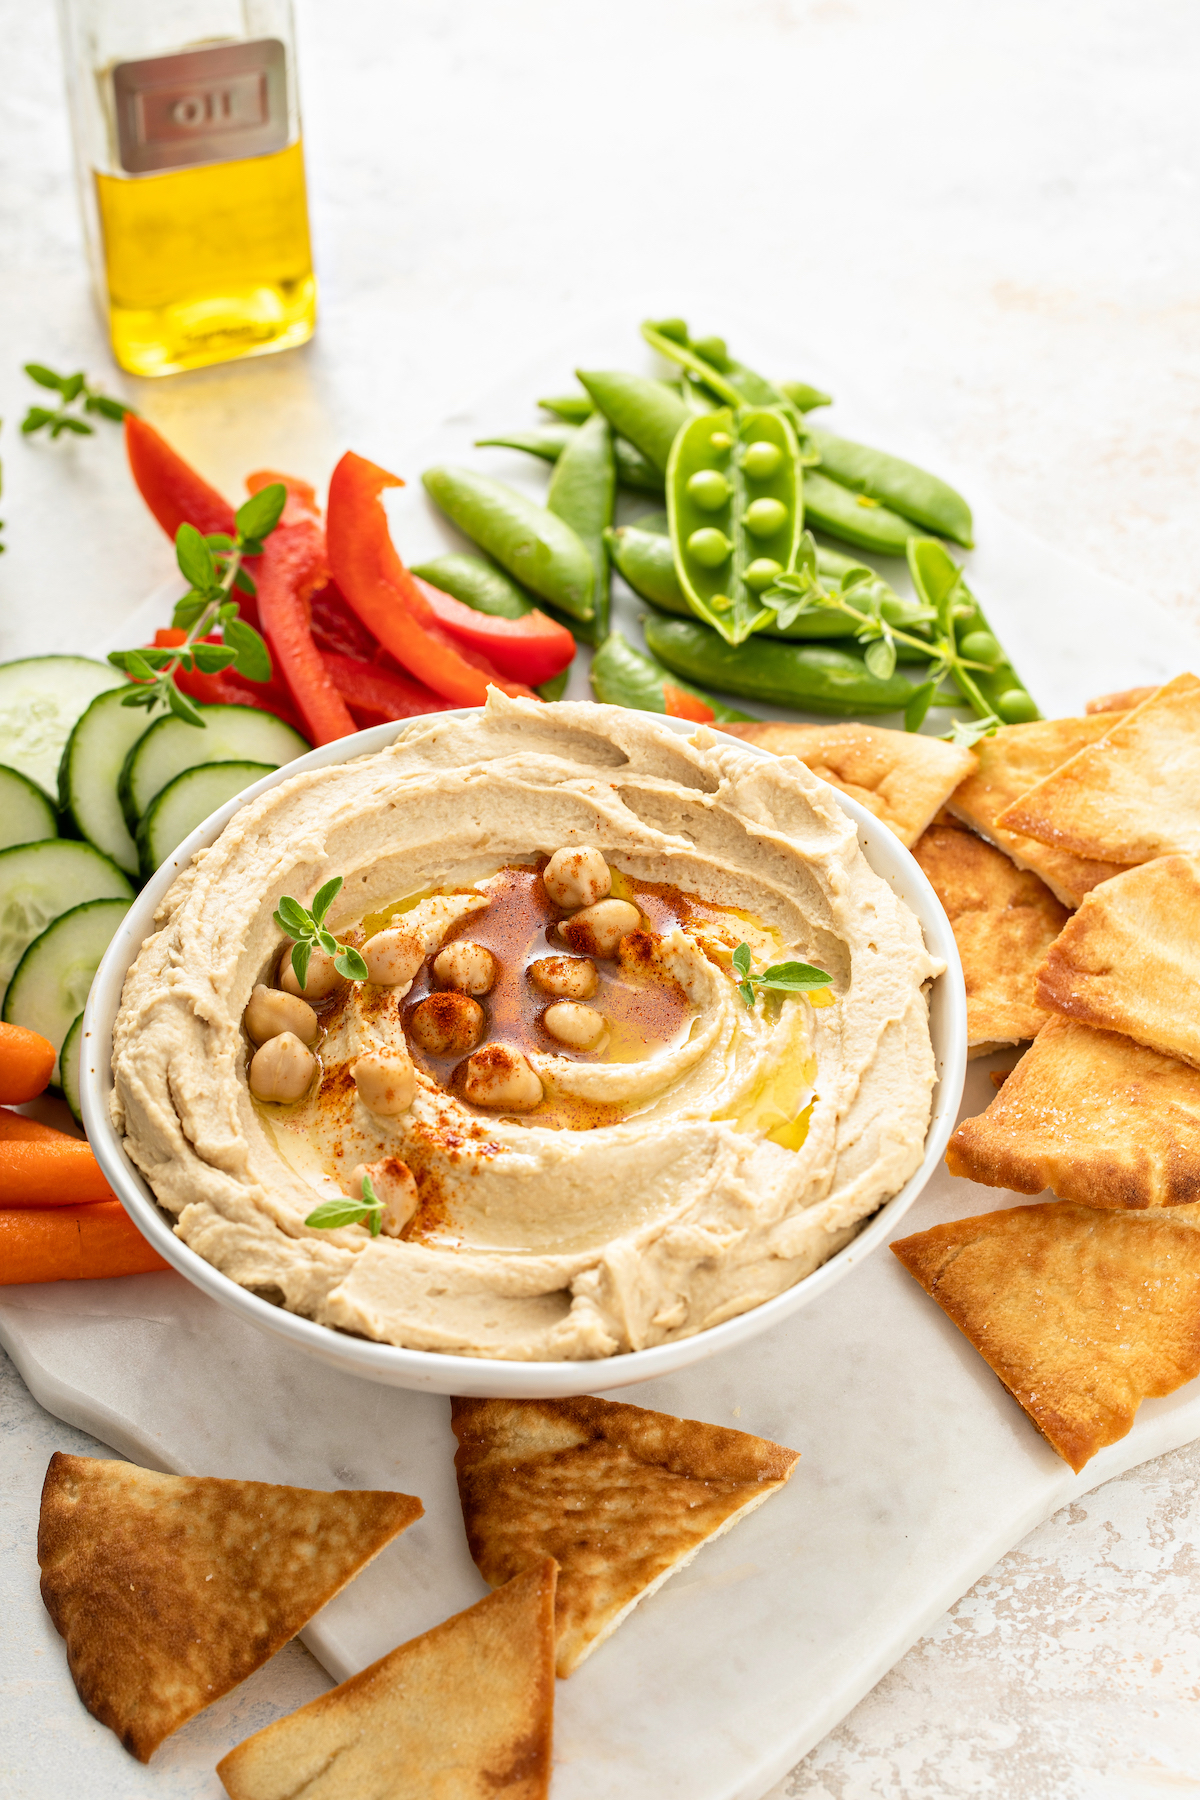 A bowl of hummus with crackers, snap peas, and other dippers.